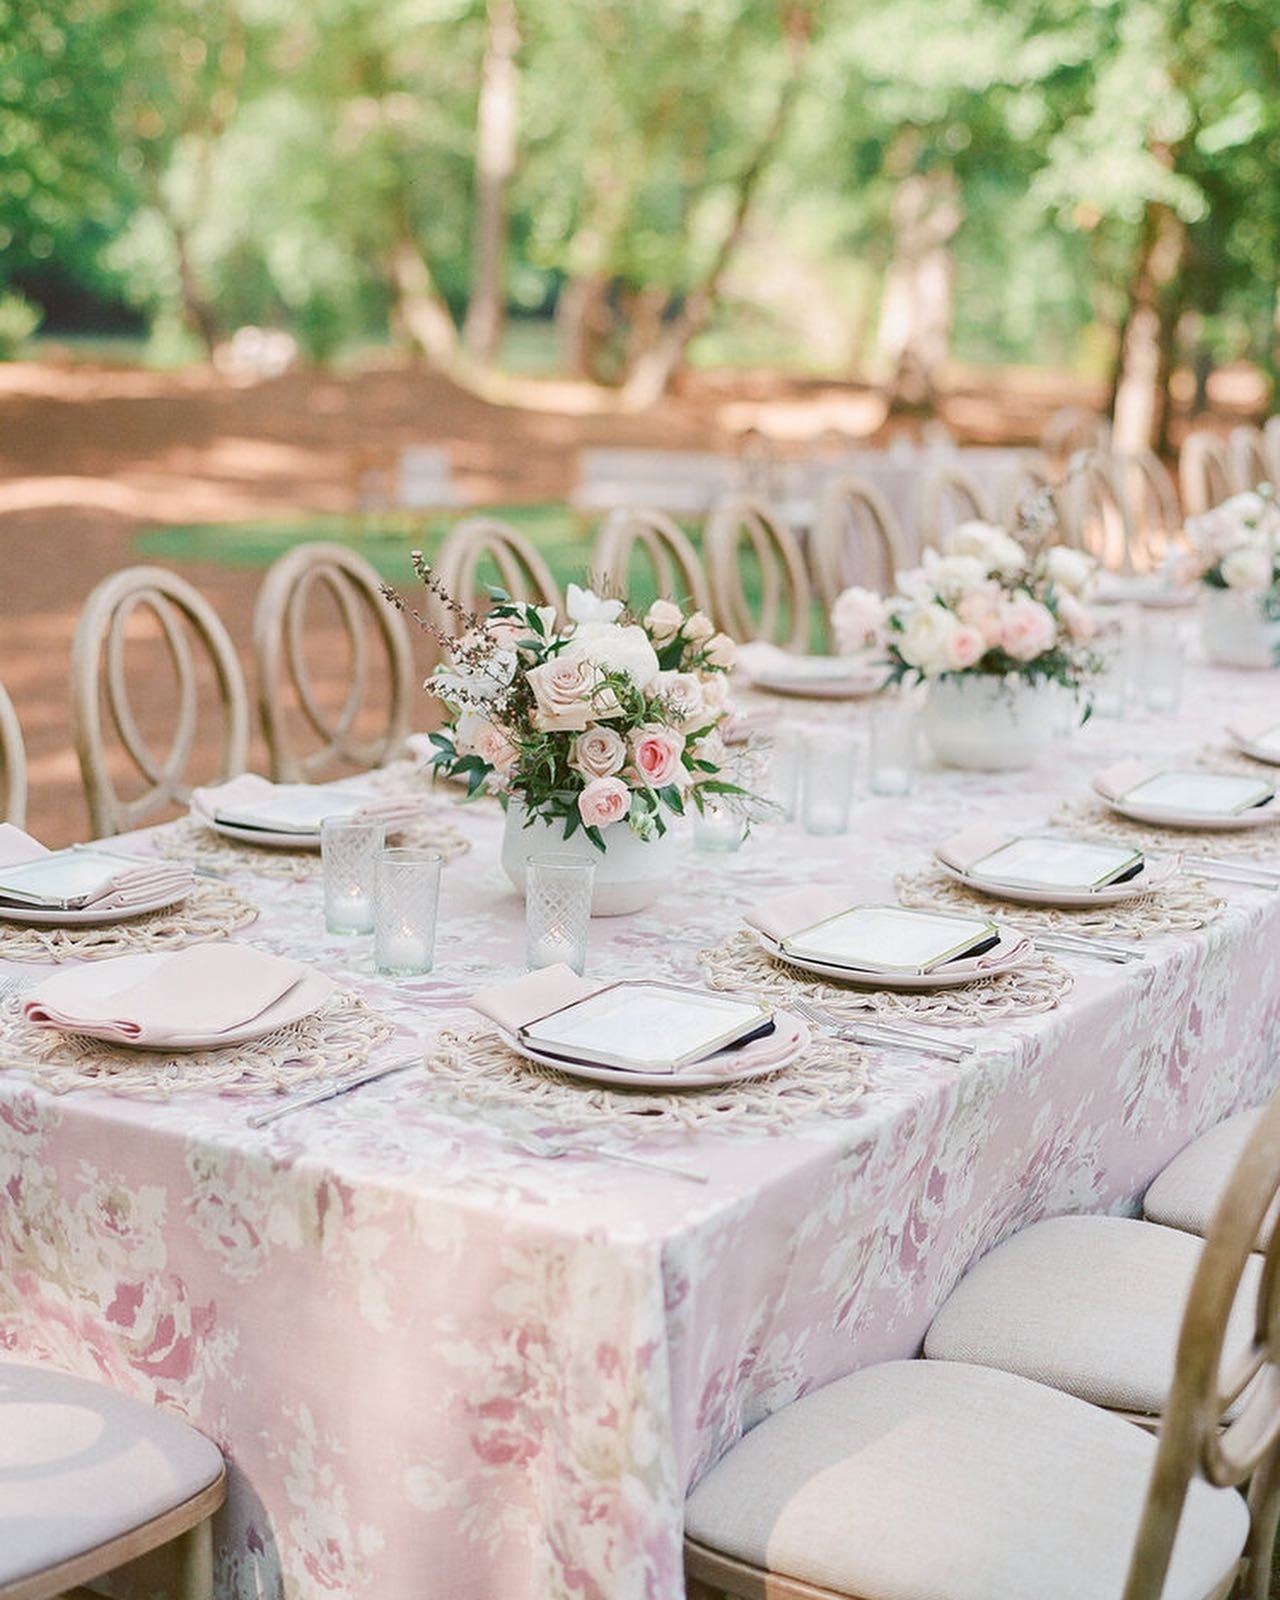 From blush garden party to hot pink pool party. We love a two-in-one celebration. 🌸🎀🦩
.
.
.
.
.
VENUE Private Residence
PLANNING &amp; DESIGN Simply Charming Socials
PHOTOGRAPHY @candace_photography 
RENTALS @eventworksrentals 
LINENS @bbjlatavola